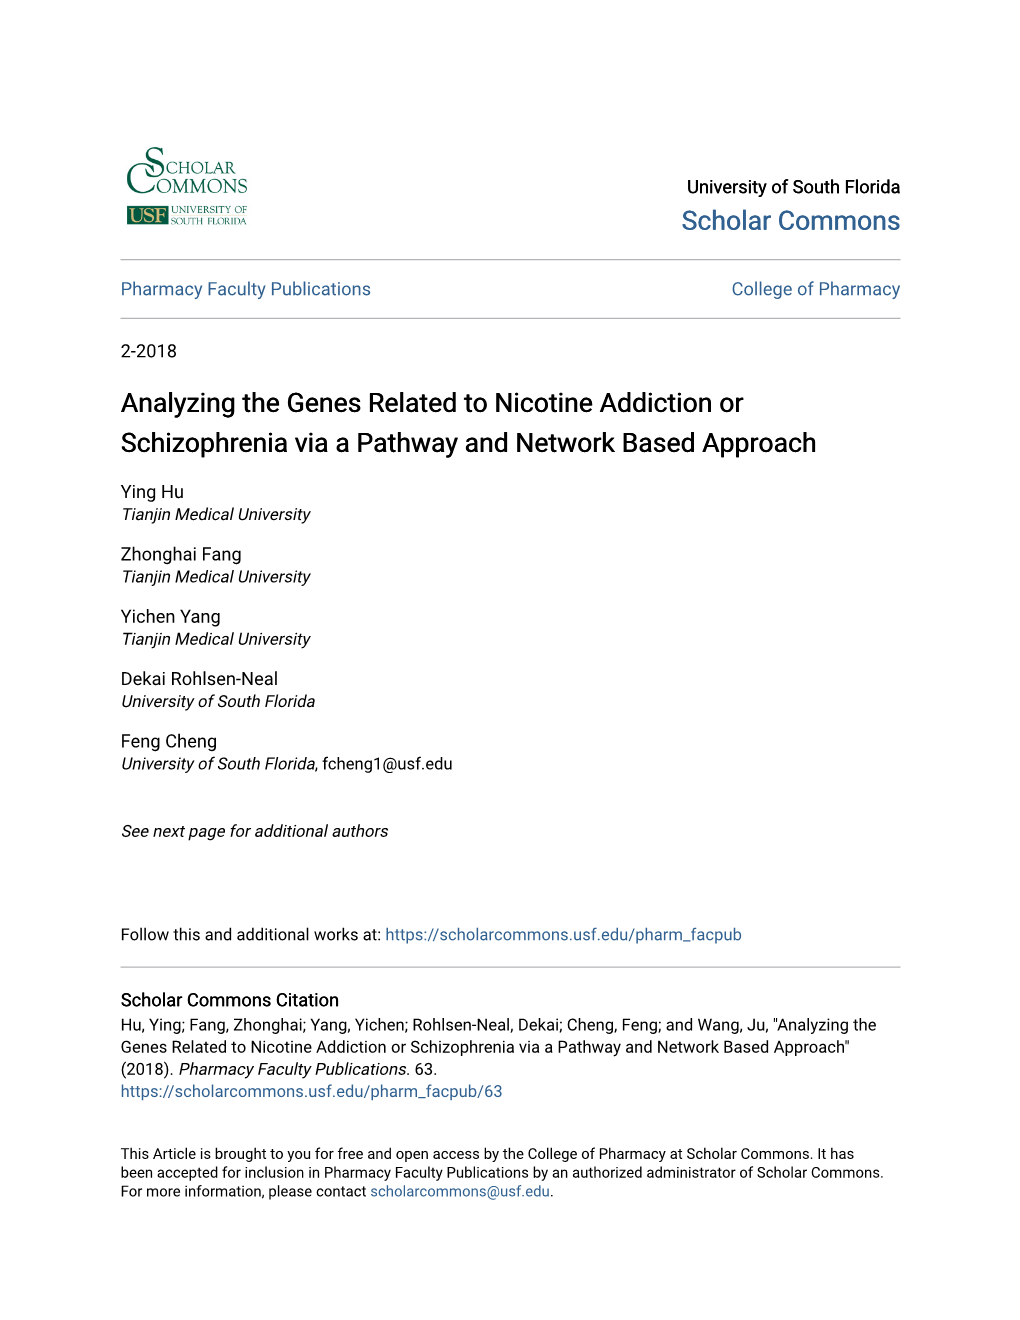 Analyzing the Genes Related to Nicotine Addiction Or Schizophrenia Via a Pathway and Network Based Approach